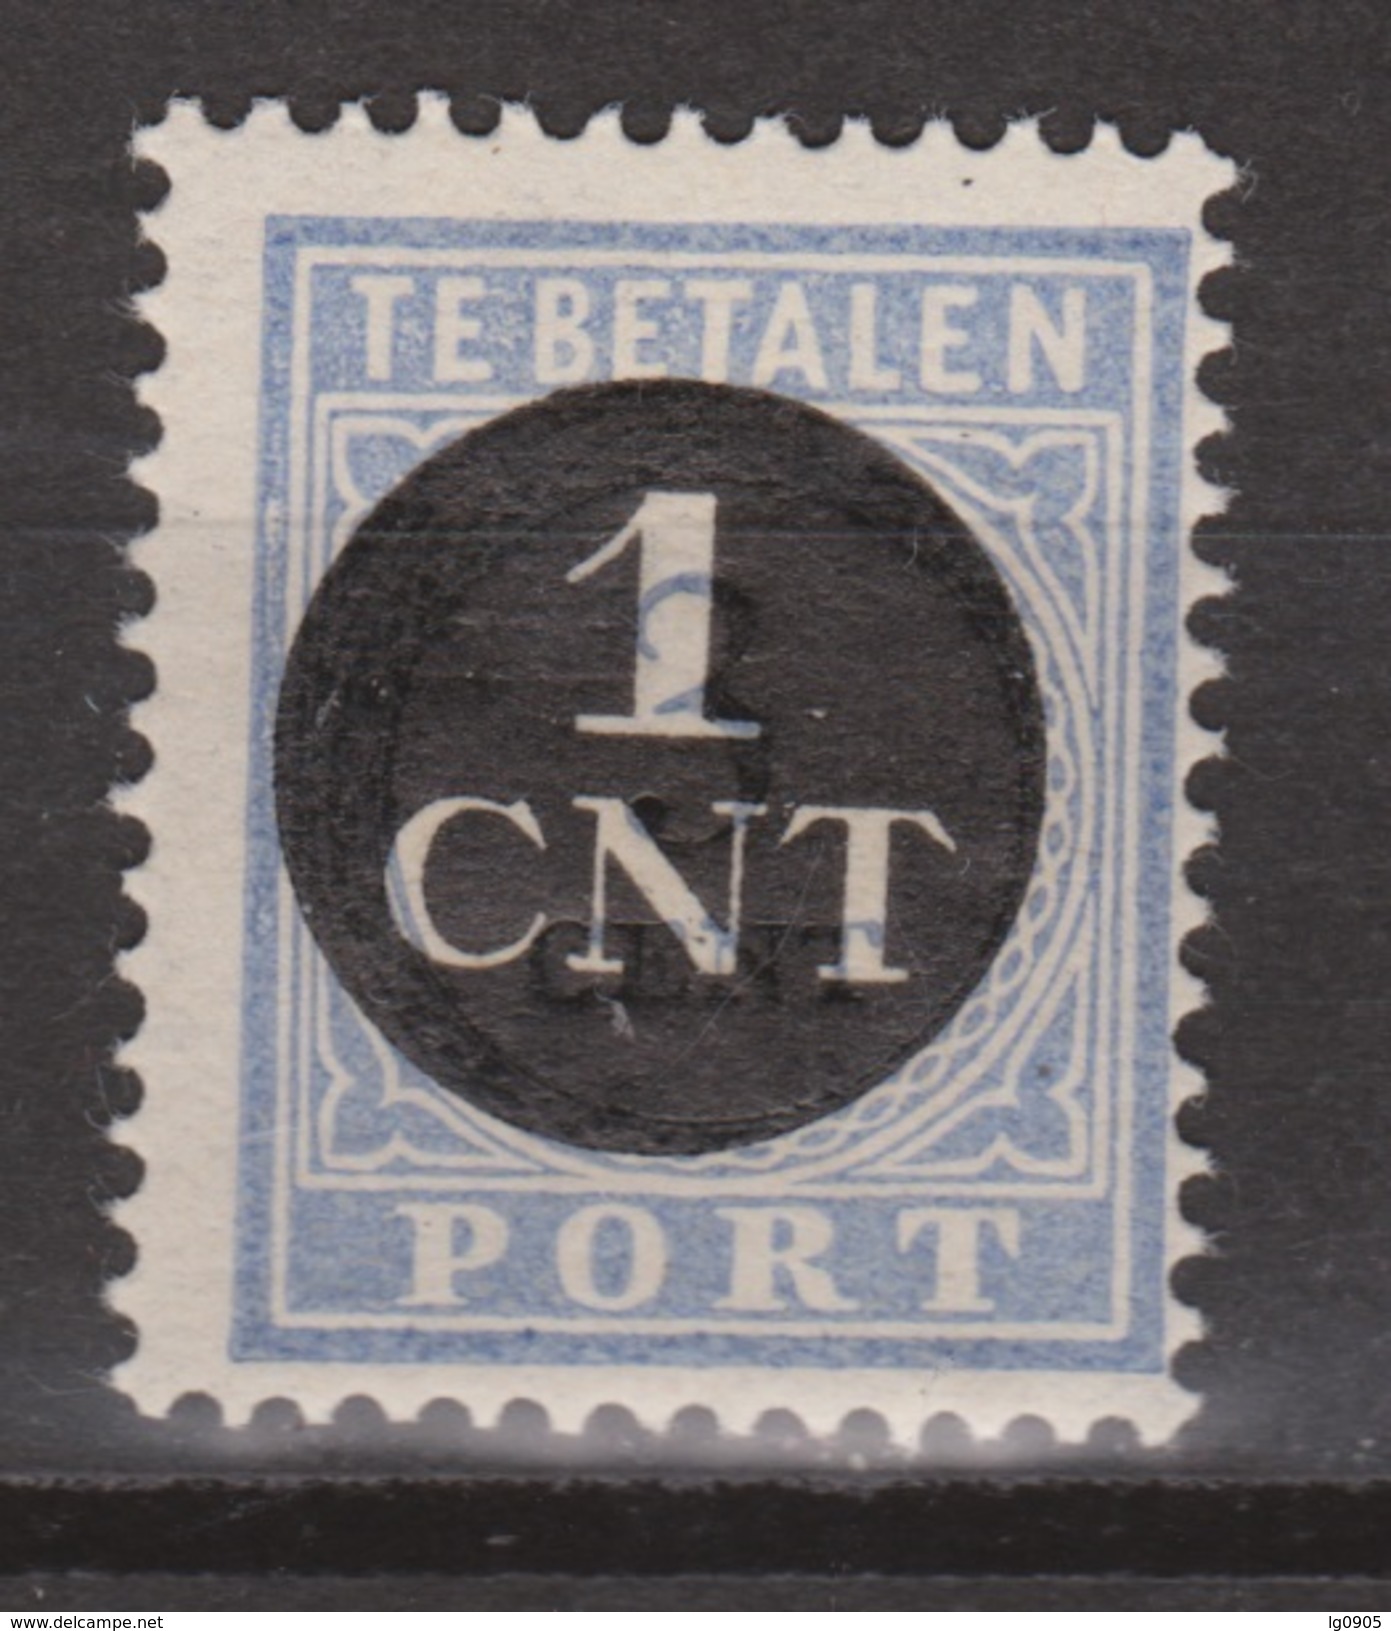 NVPH Nederland Netherlands Holanda Pays Bas Port 61 MLH Timbre-taxe Postmarke Sellos De Correos NOW MANY DUE STAMPS - Strafportzegels